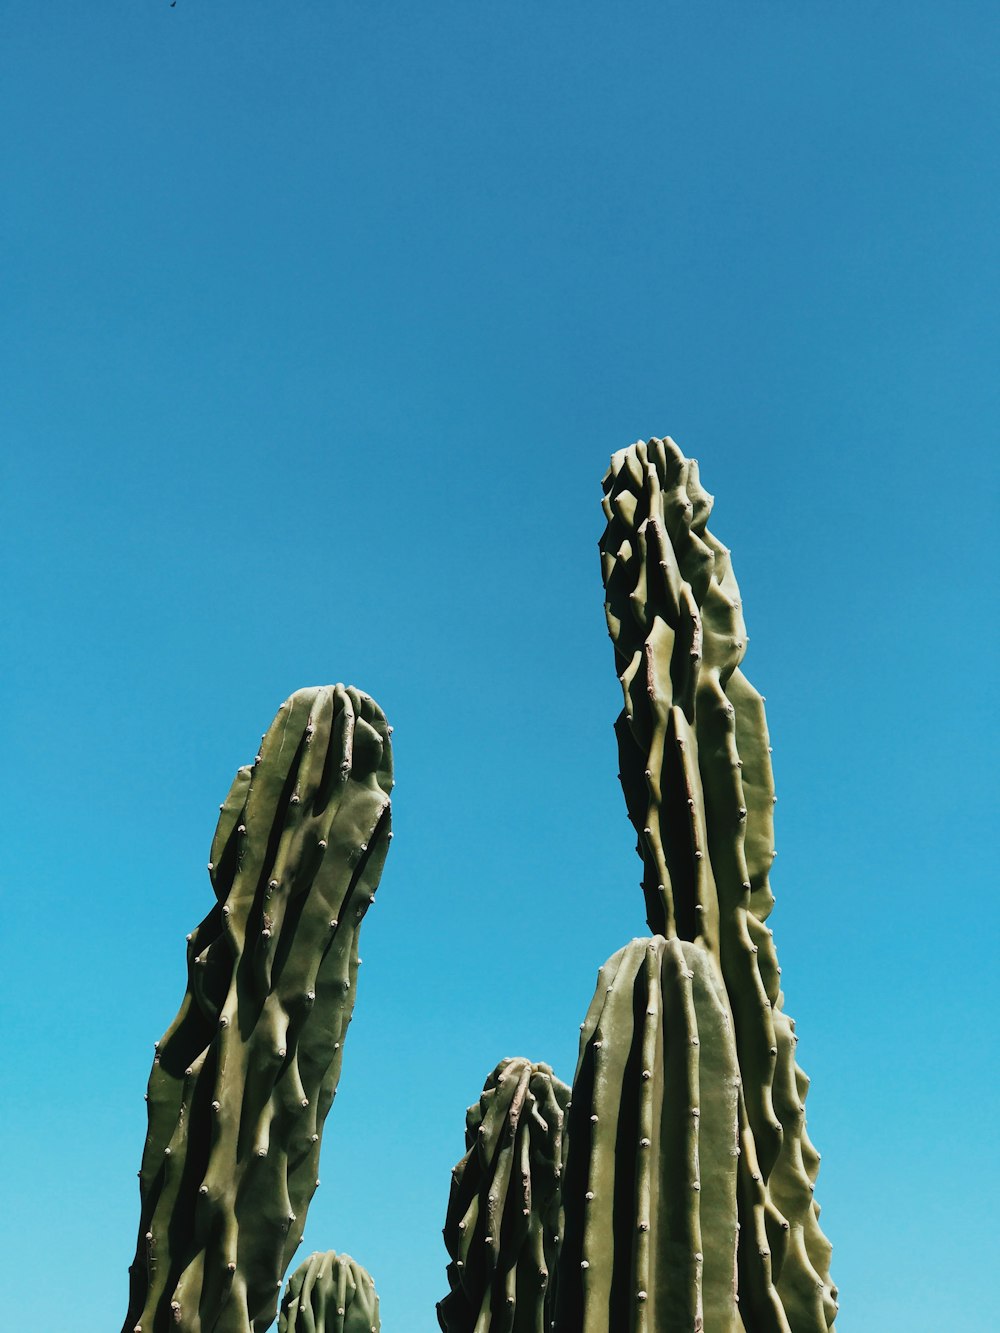 gray cactus under blue sky during daytime